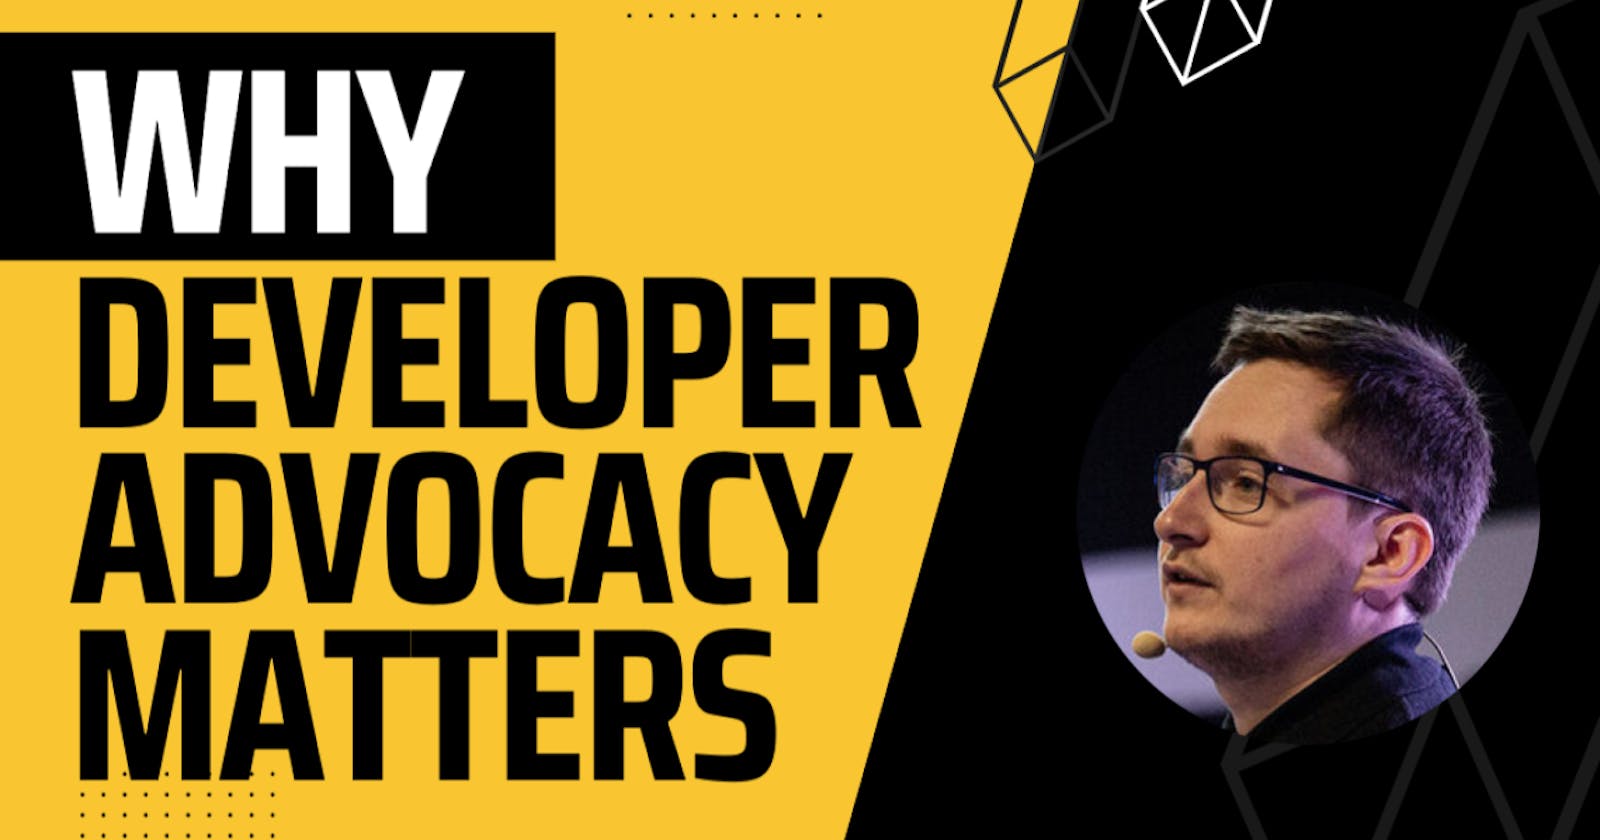 Why Developer Advocacy matters...